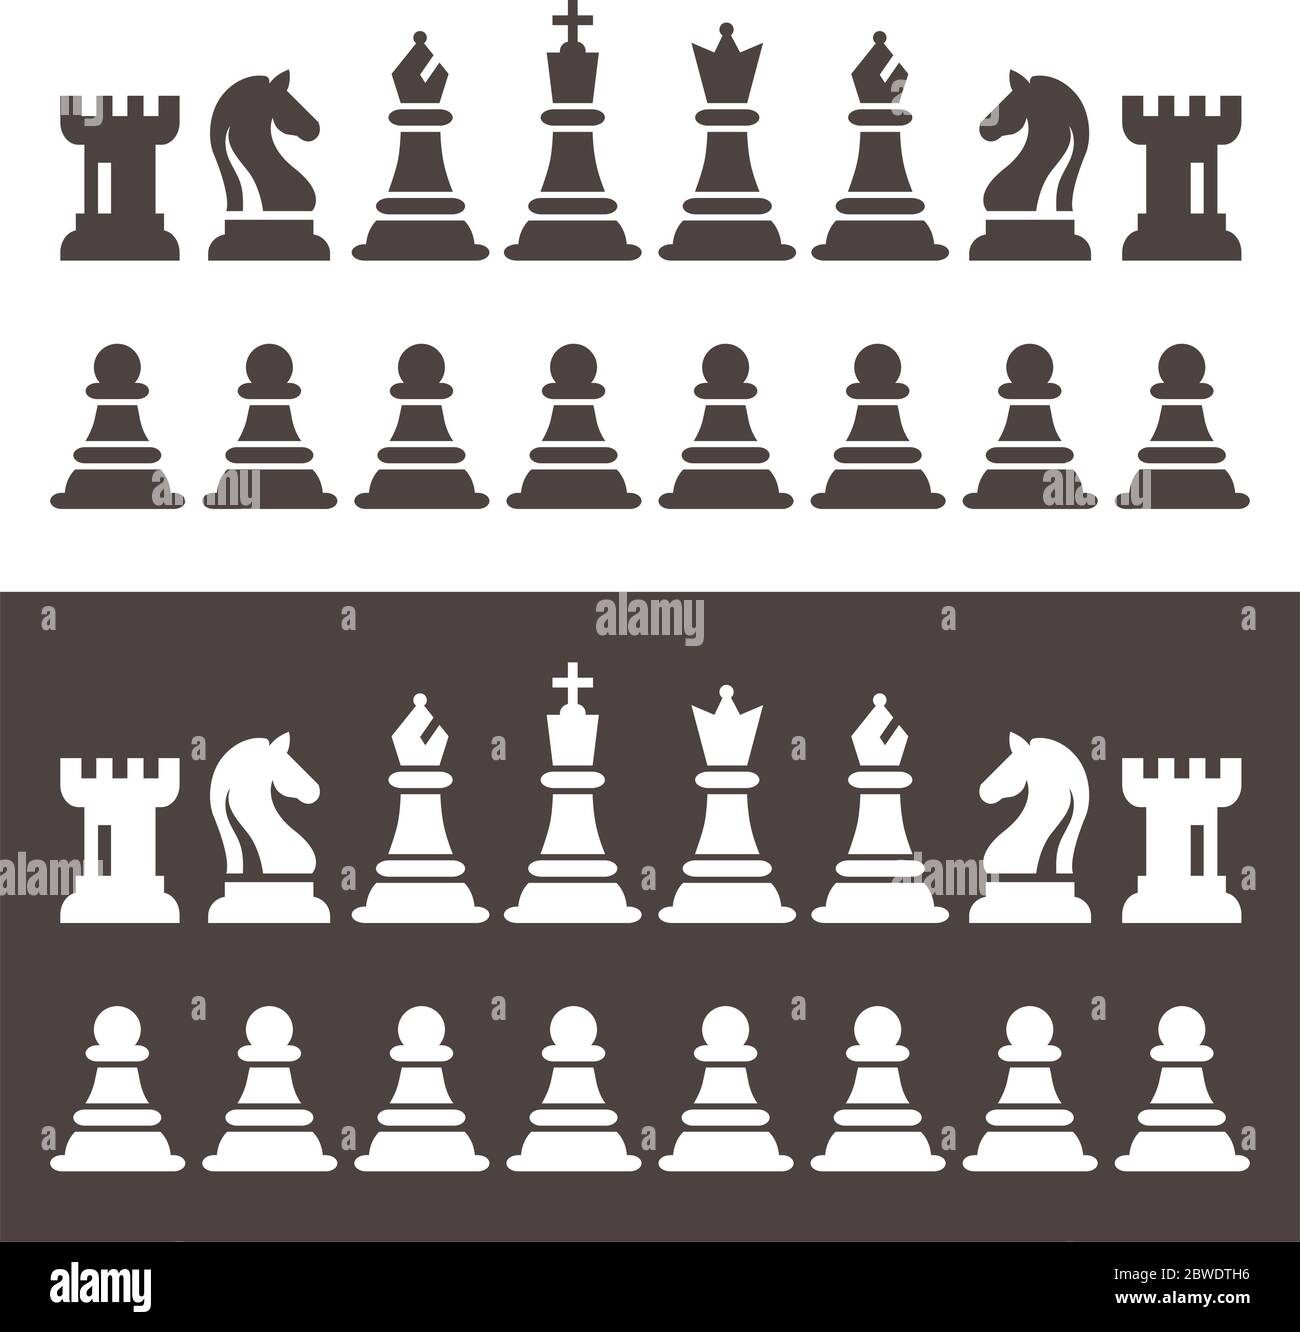 5 Unicode Chess Images, Stock Photos, 3D objects, & Vectors